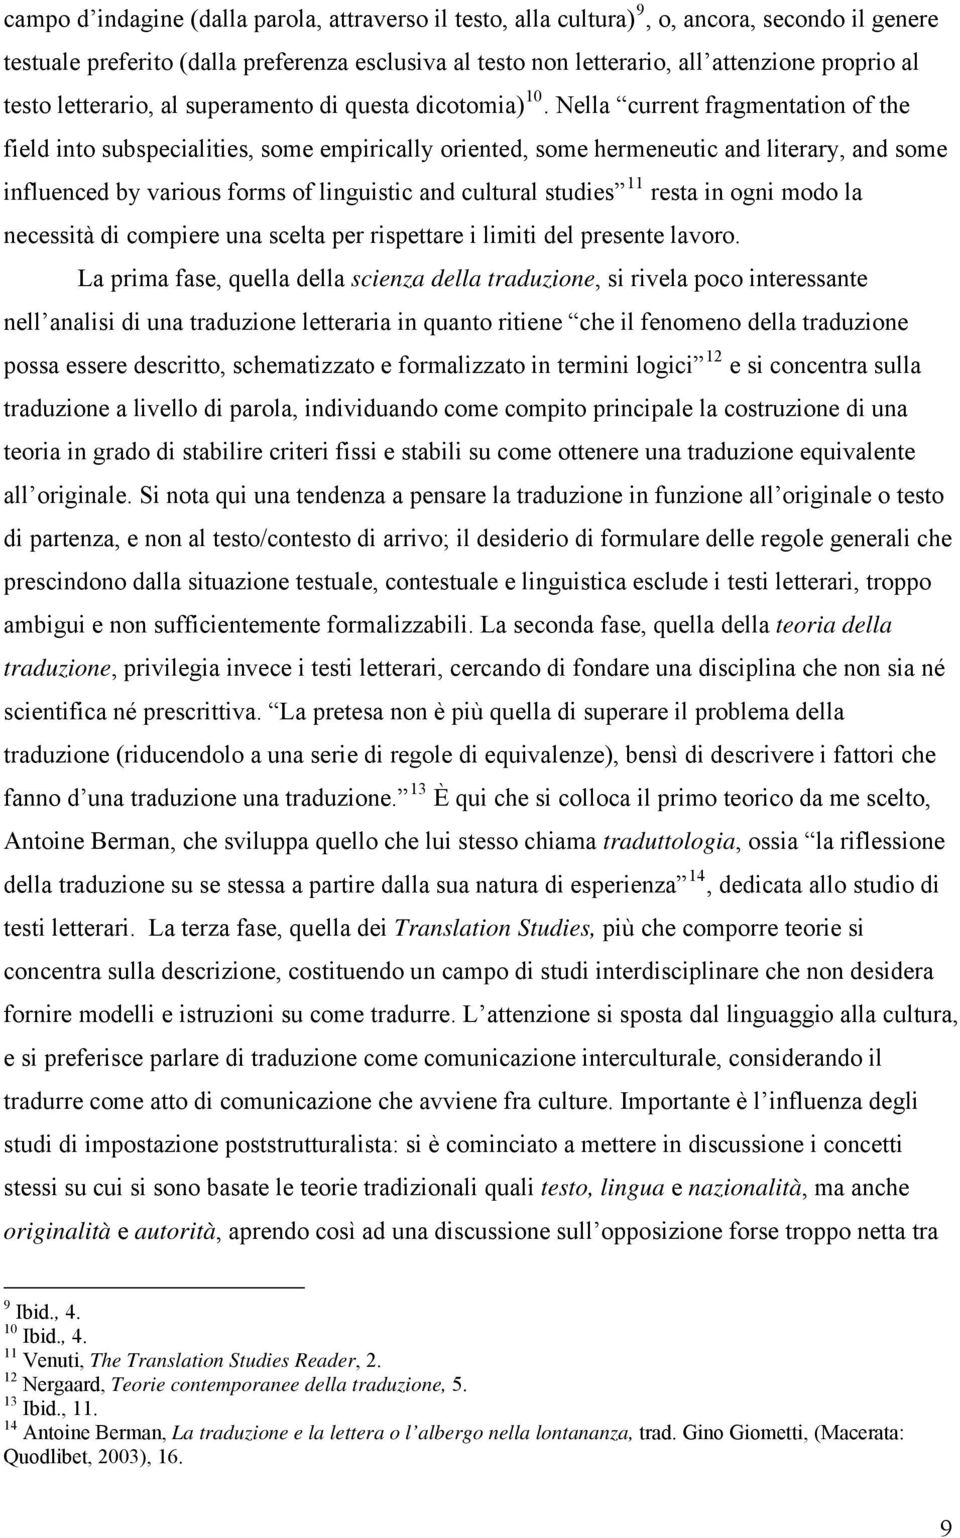 Nella current fragmentation of the field into subspecialities, some empirically oriented, some hermeneutic and literary, and some influenced by various forms of linguistic and cultural studies 11